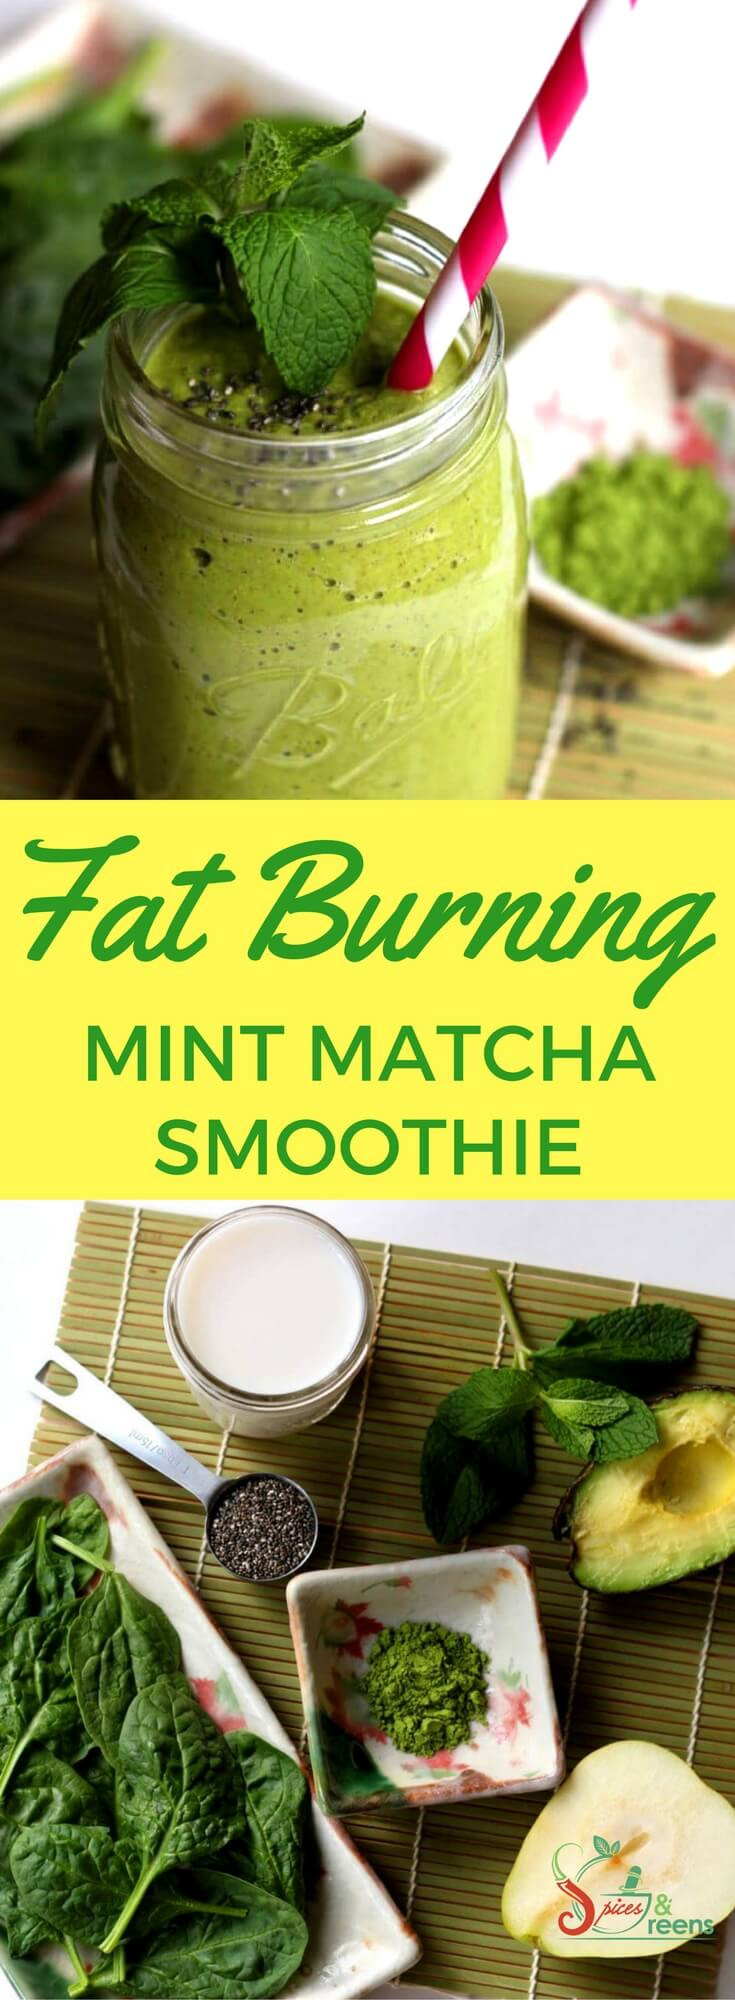 Green Tea Smoothies For Weight Loss
 Mint Matcha Smoothie Spices & Greens